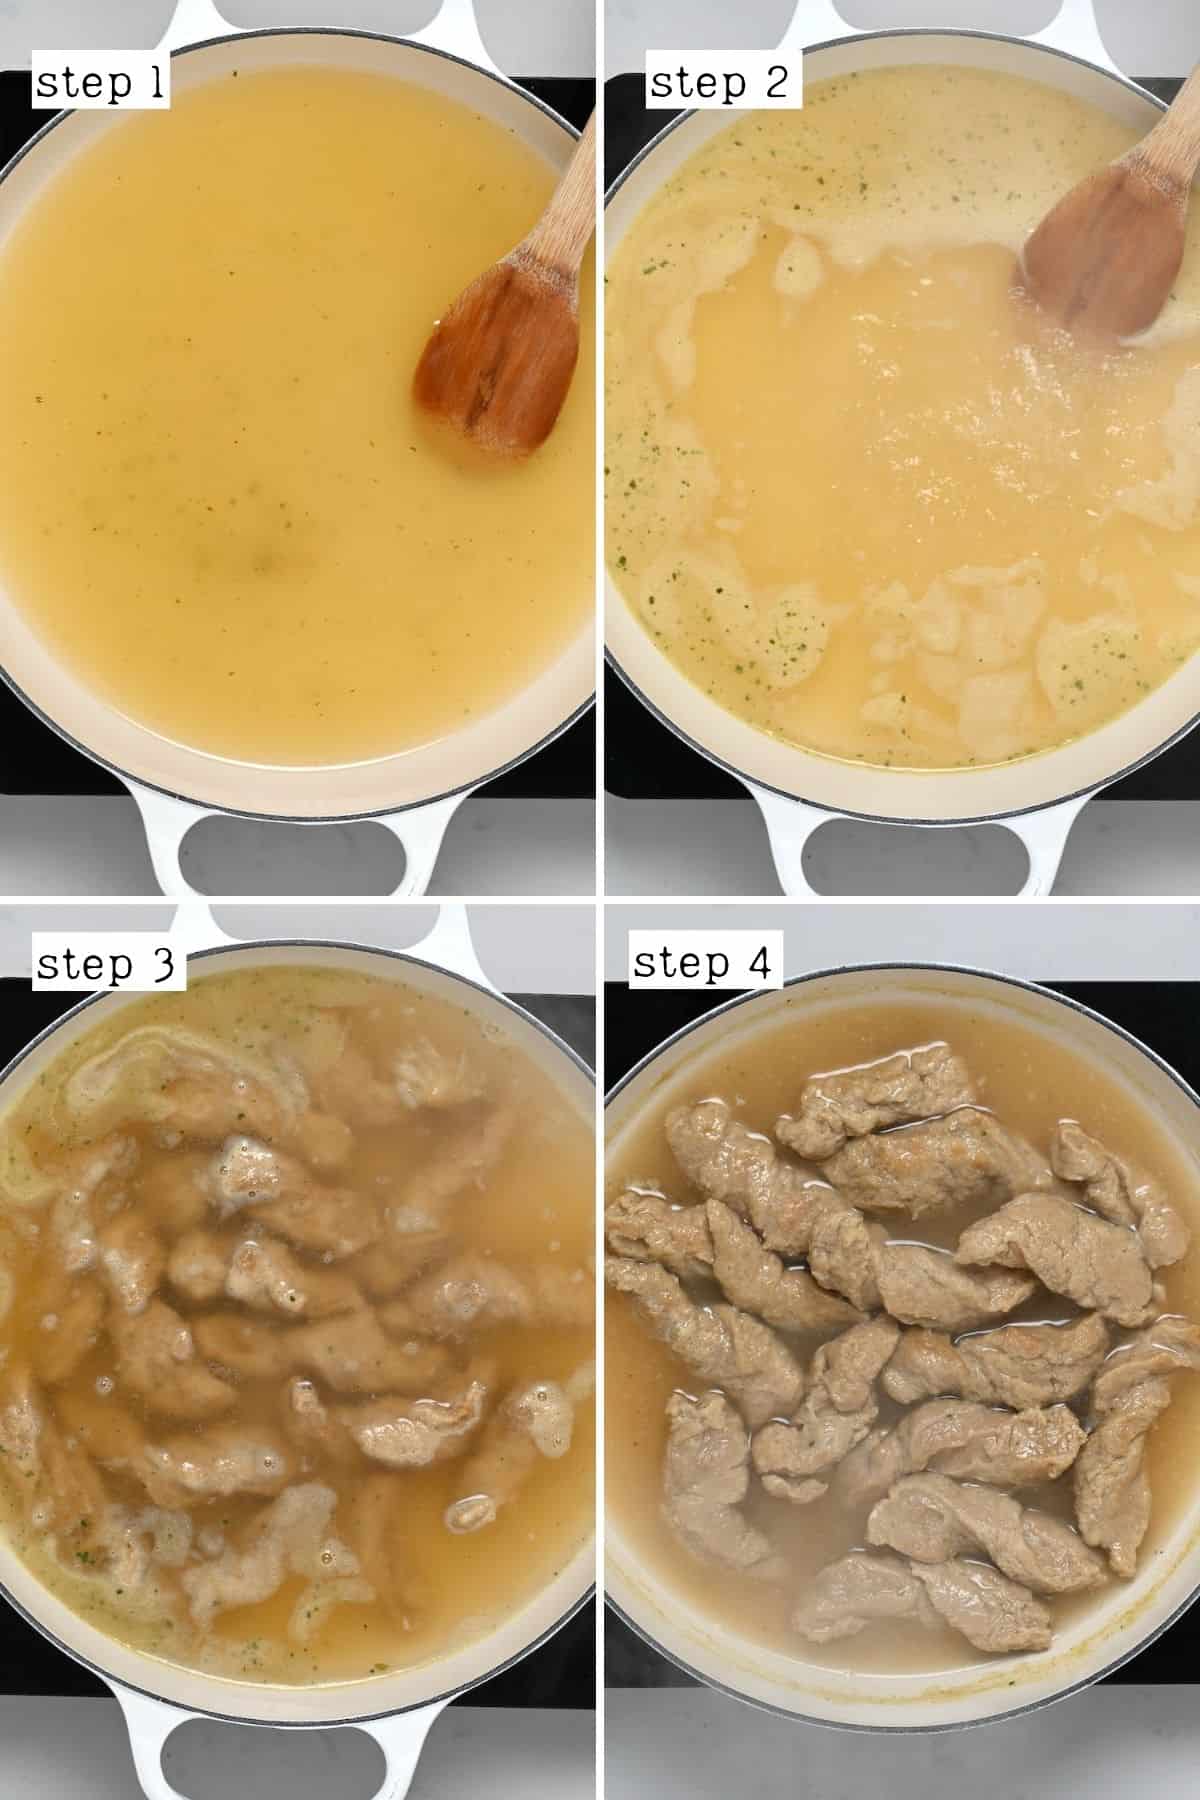 Steps for cooking seitan in broth